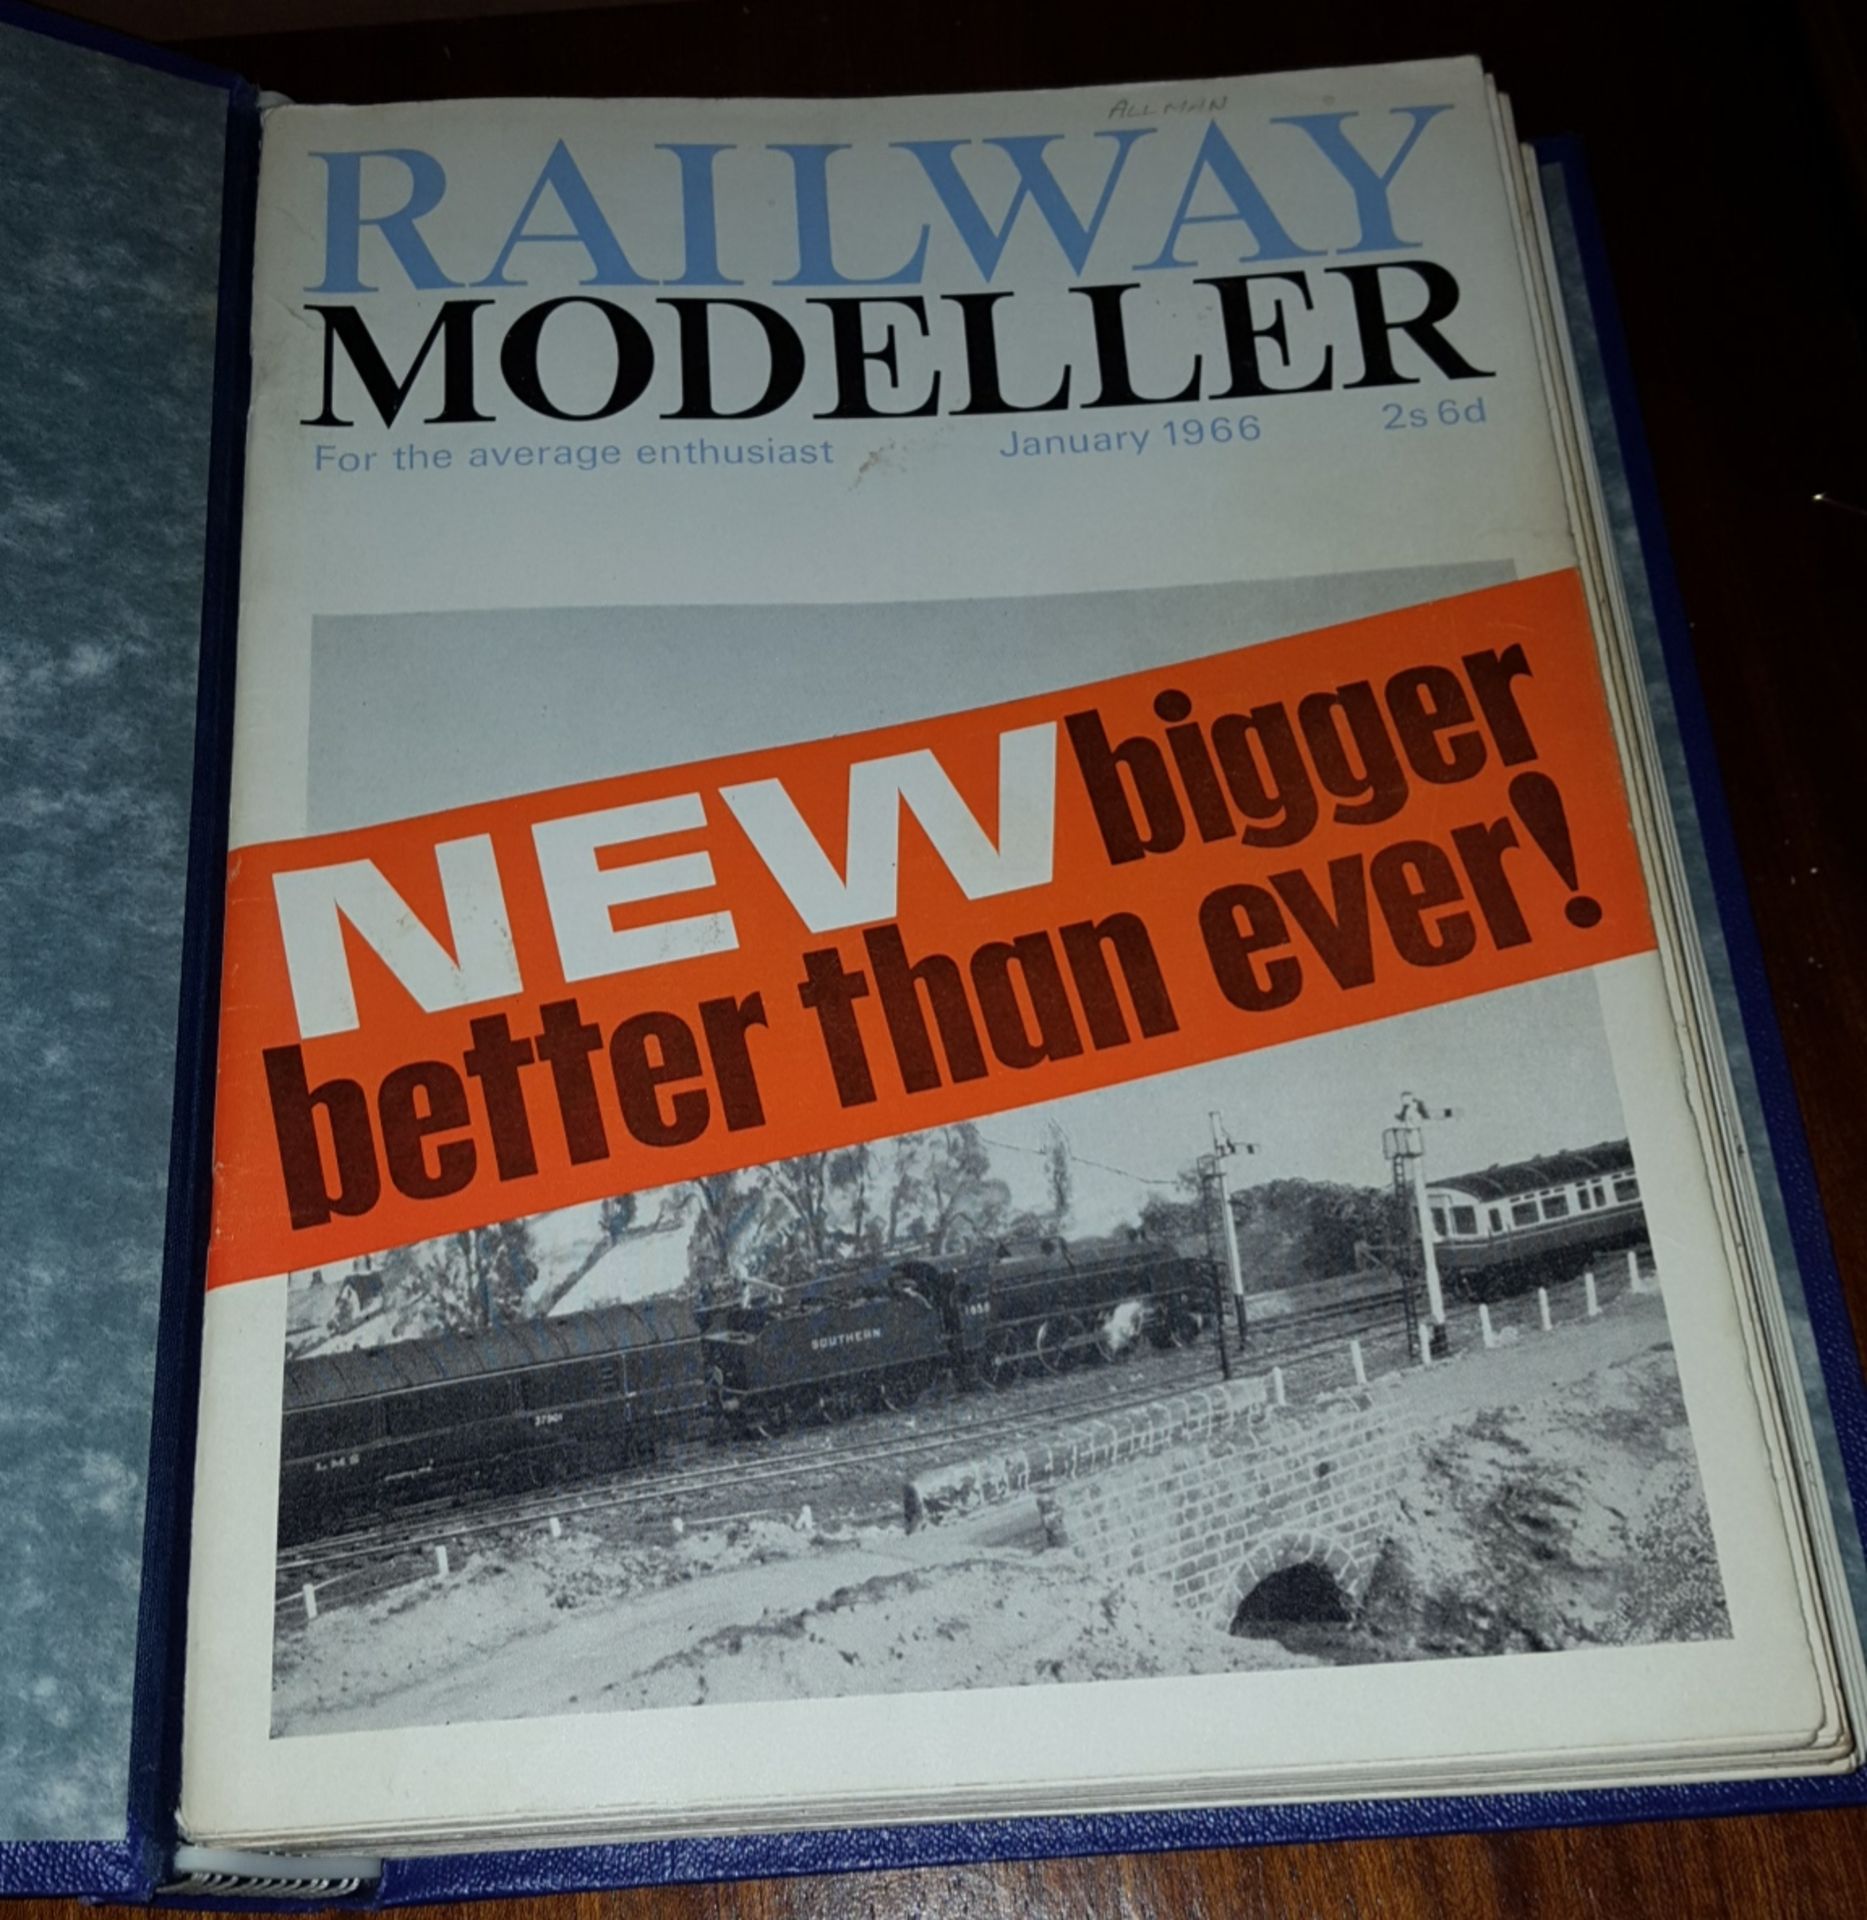 12 x Collectable Railway Magazines 'Railway Modeller' 1966 Complete Year Bound Copy - Image 2 of 3